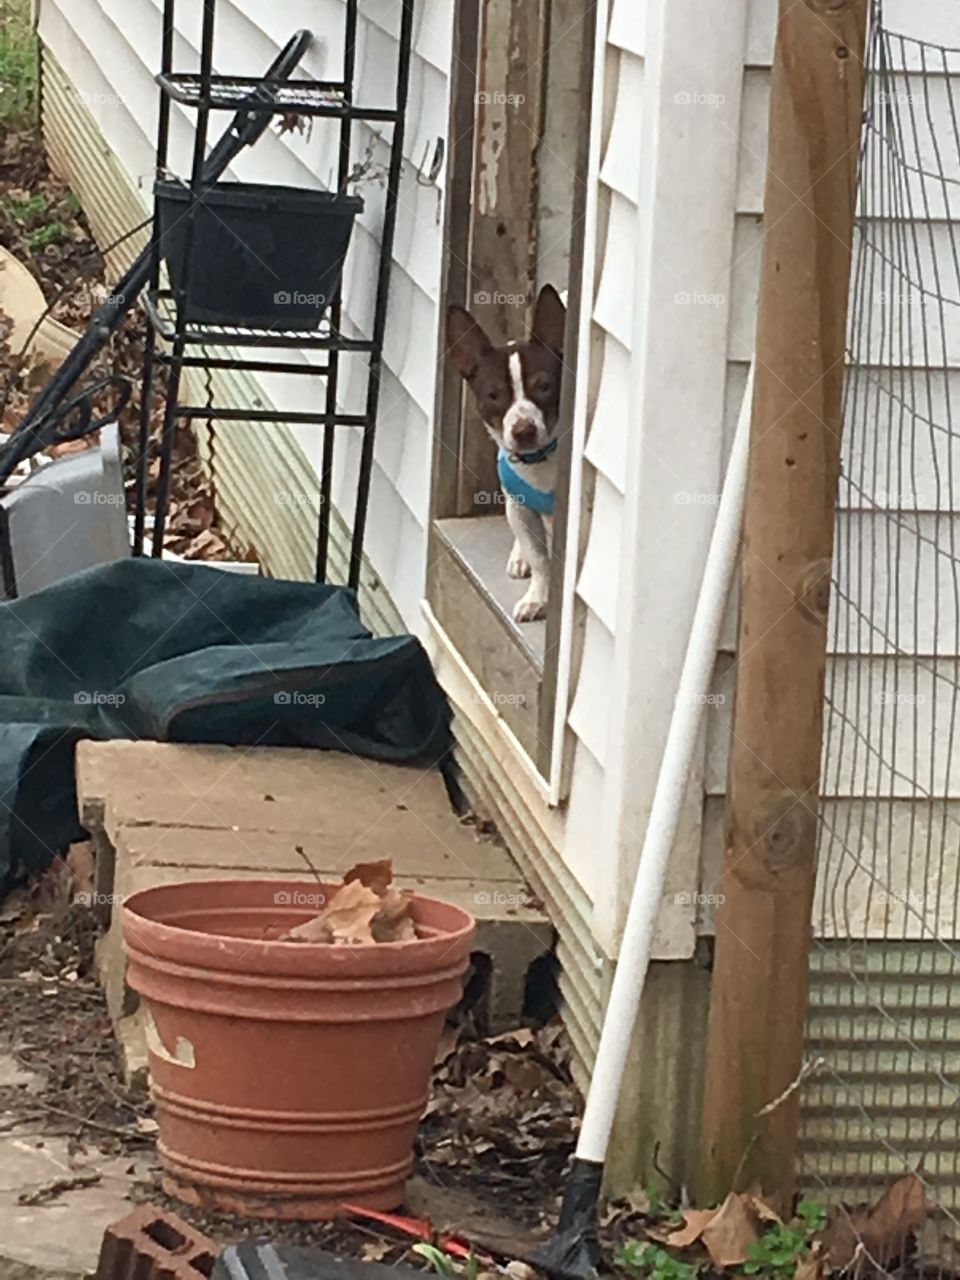 Gizmo peeking out the back door at me. You can see pots and a rack, green compost bag.